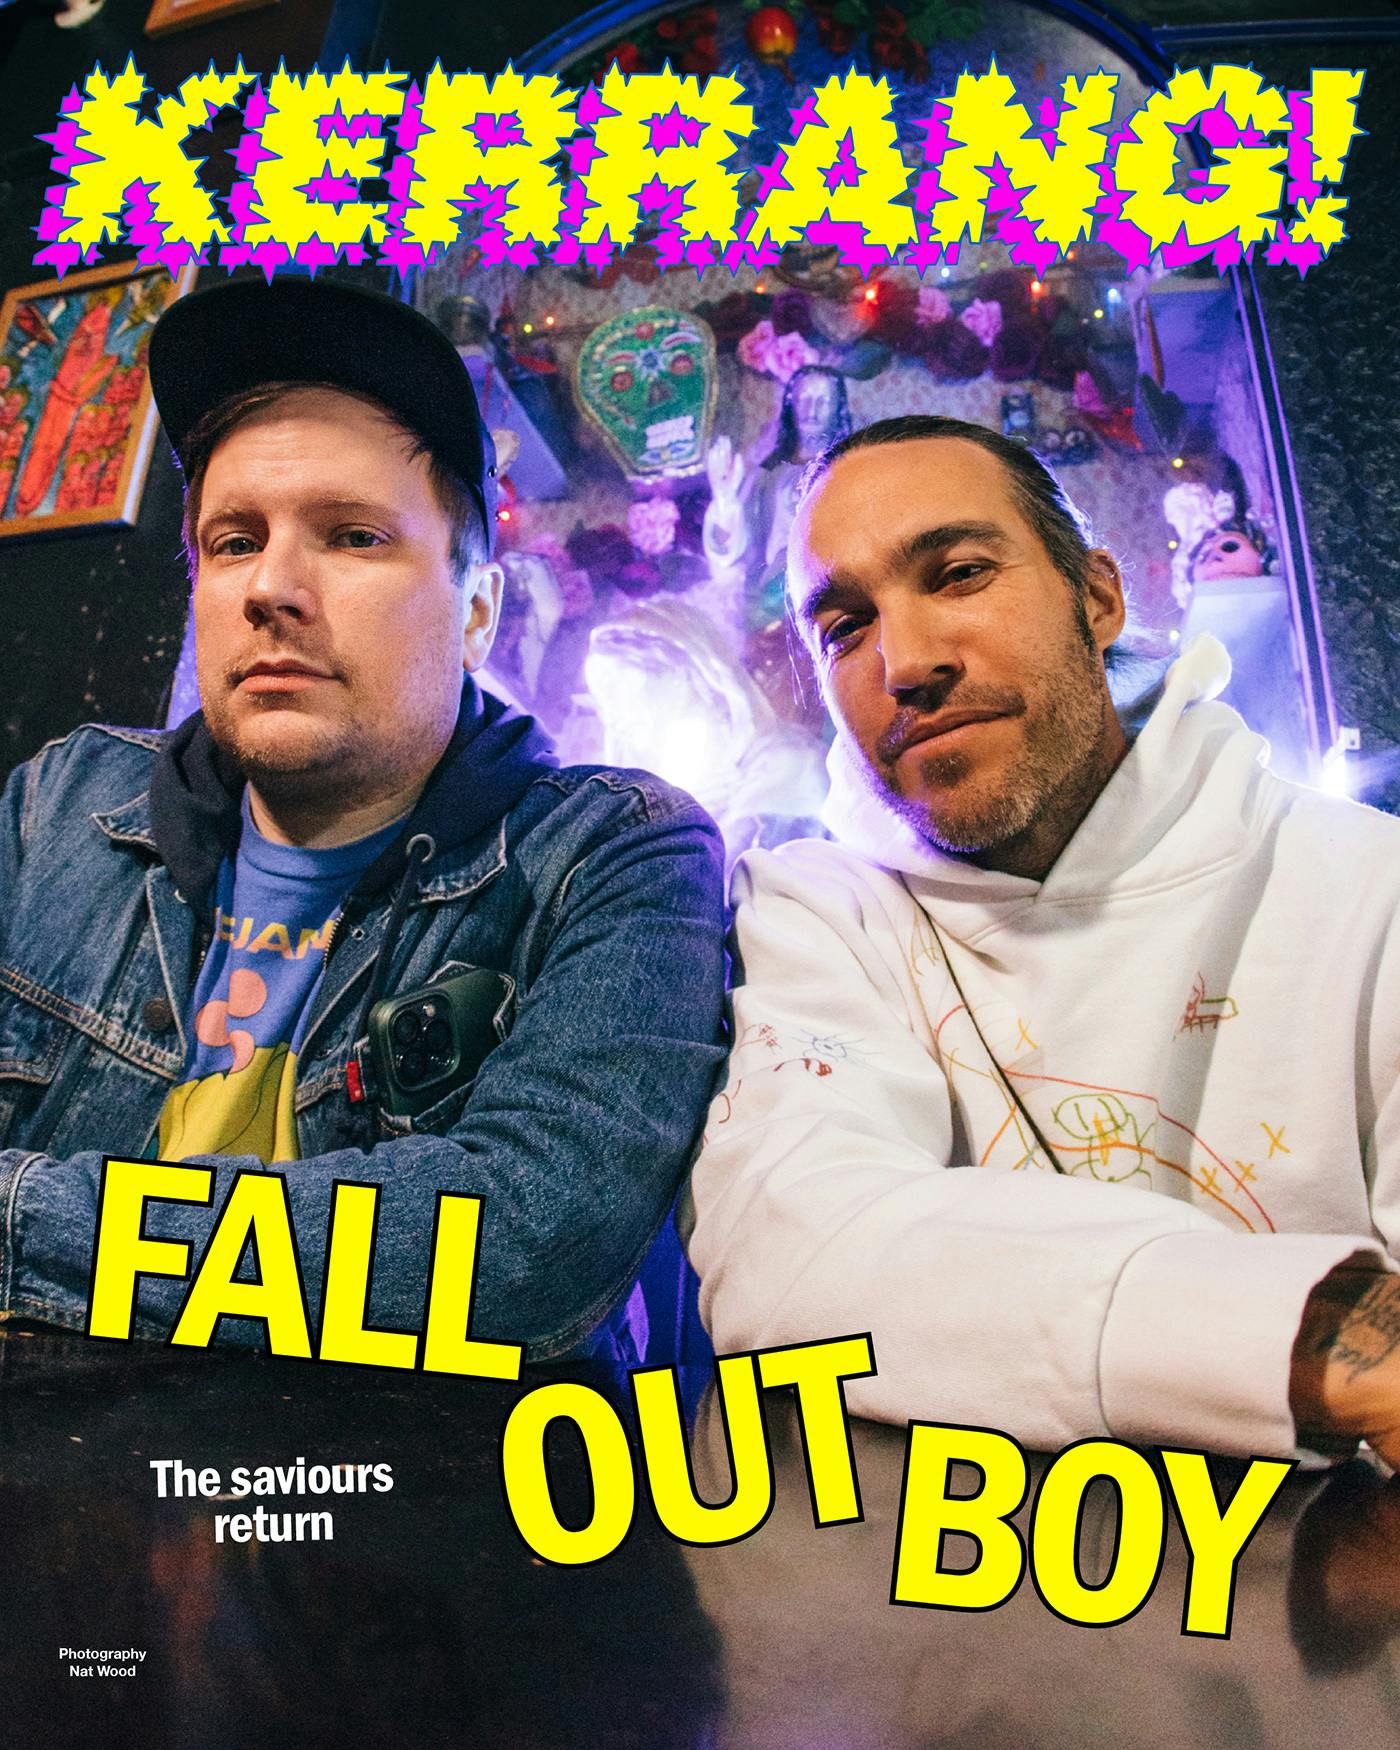 Fall Out Boy: “So often people are comparing eras, but this is the start of a new thing”